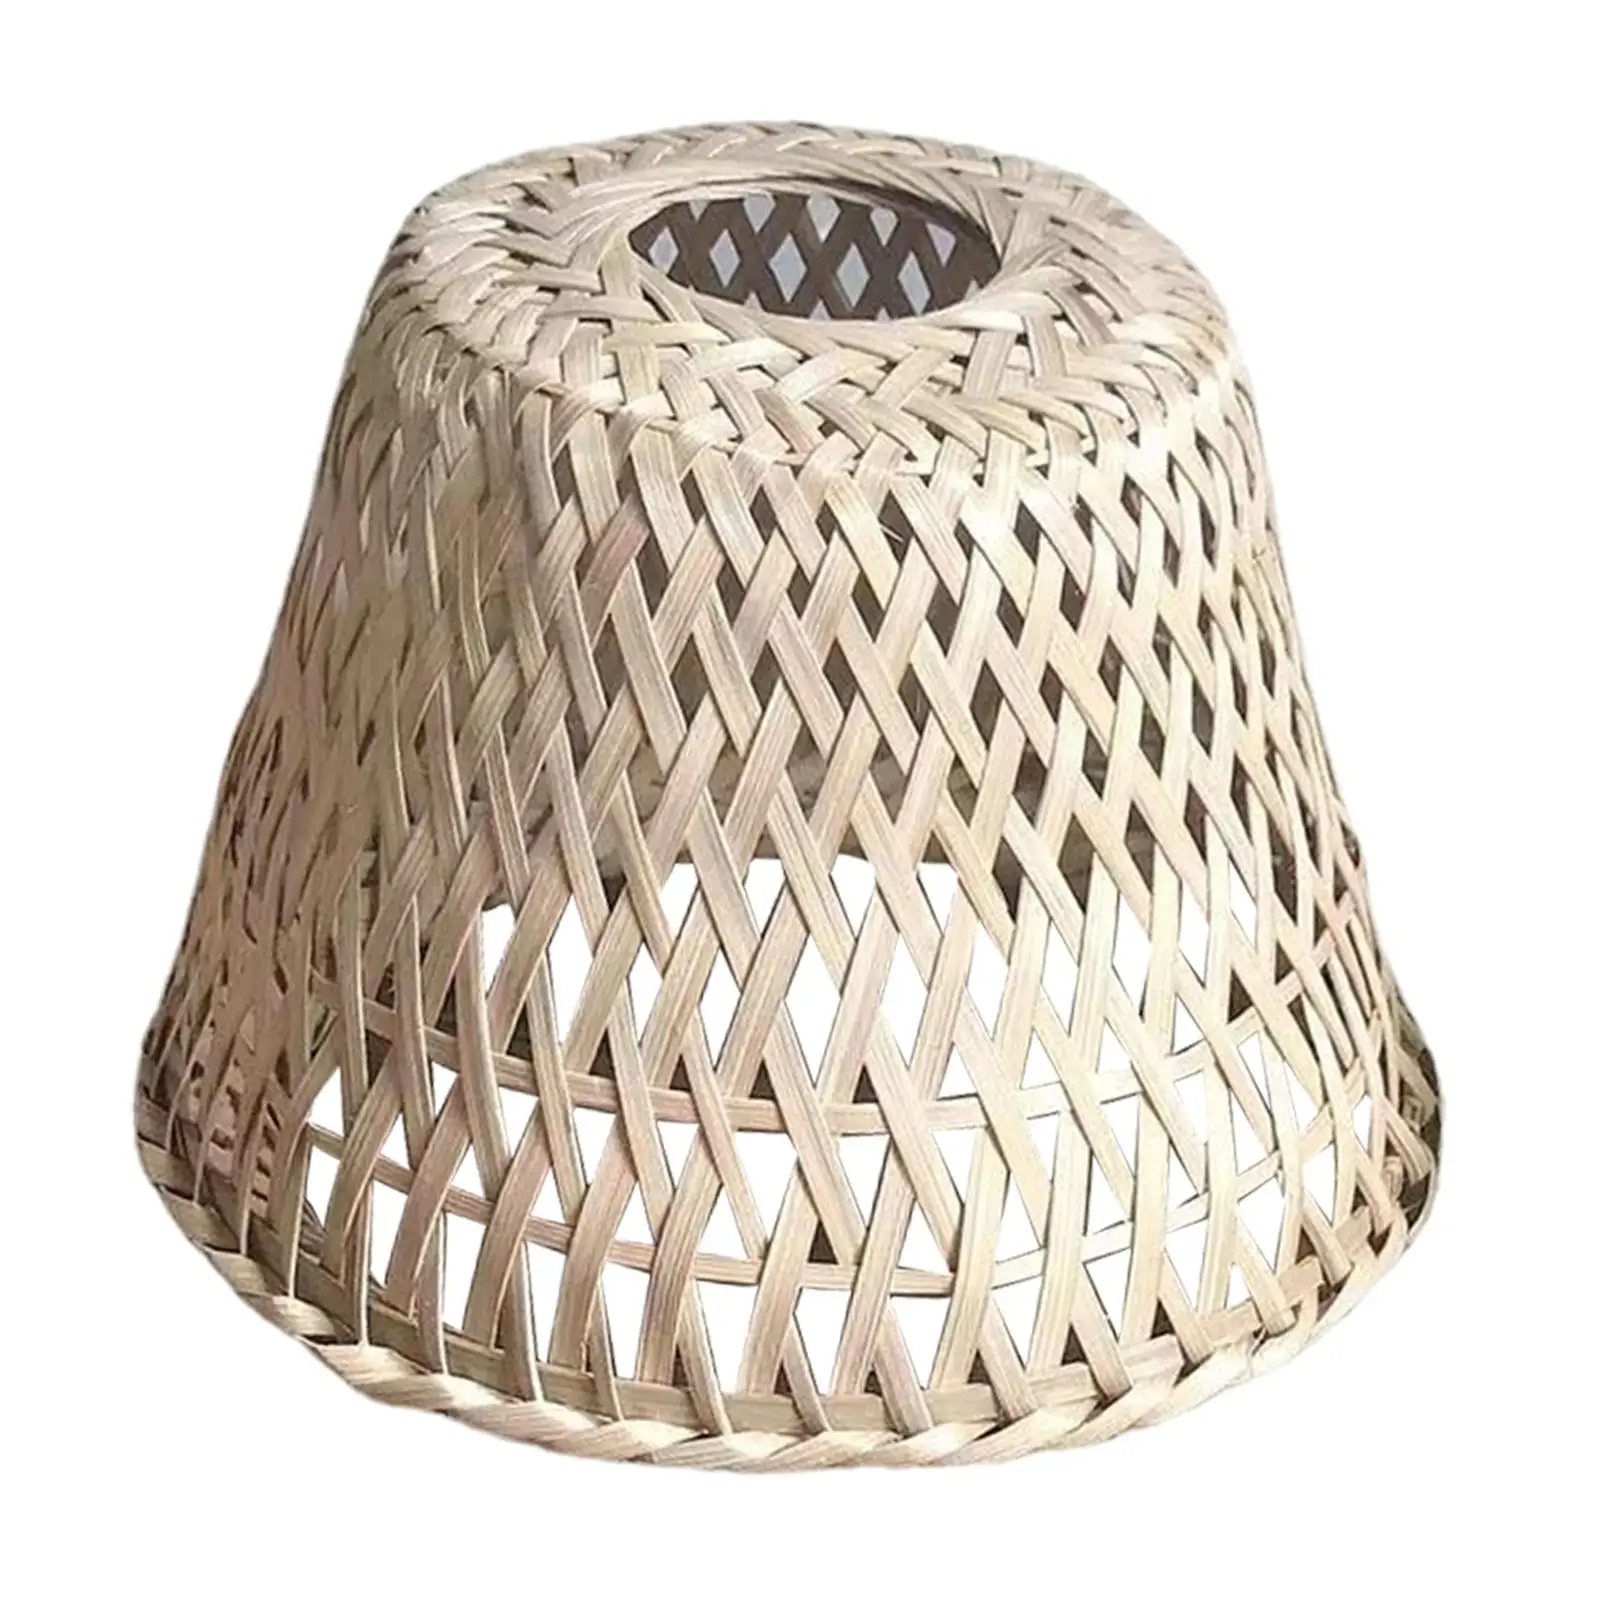 Woven Bamboo Pendant Light Shade for Living Room Rustic Premium Material